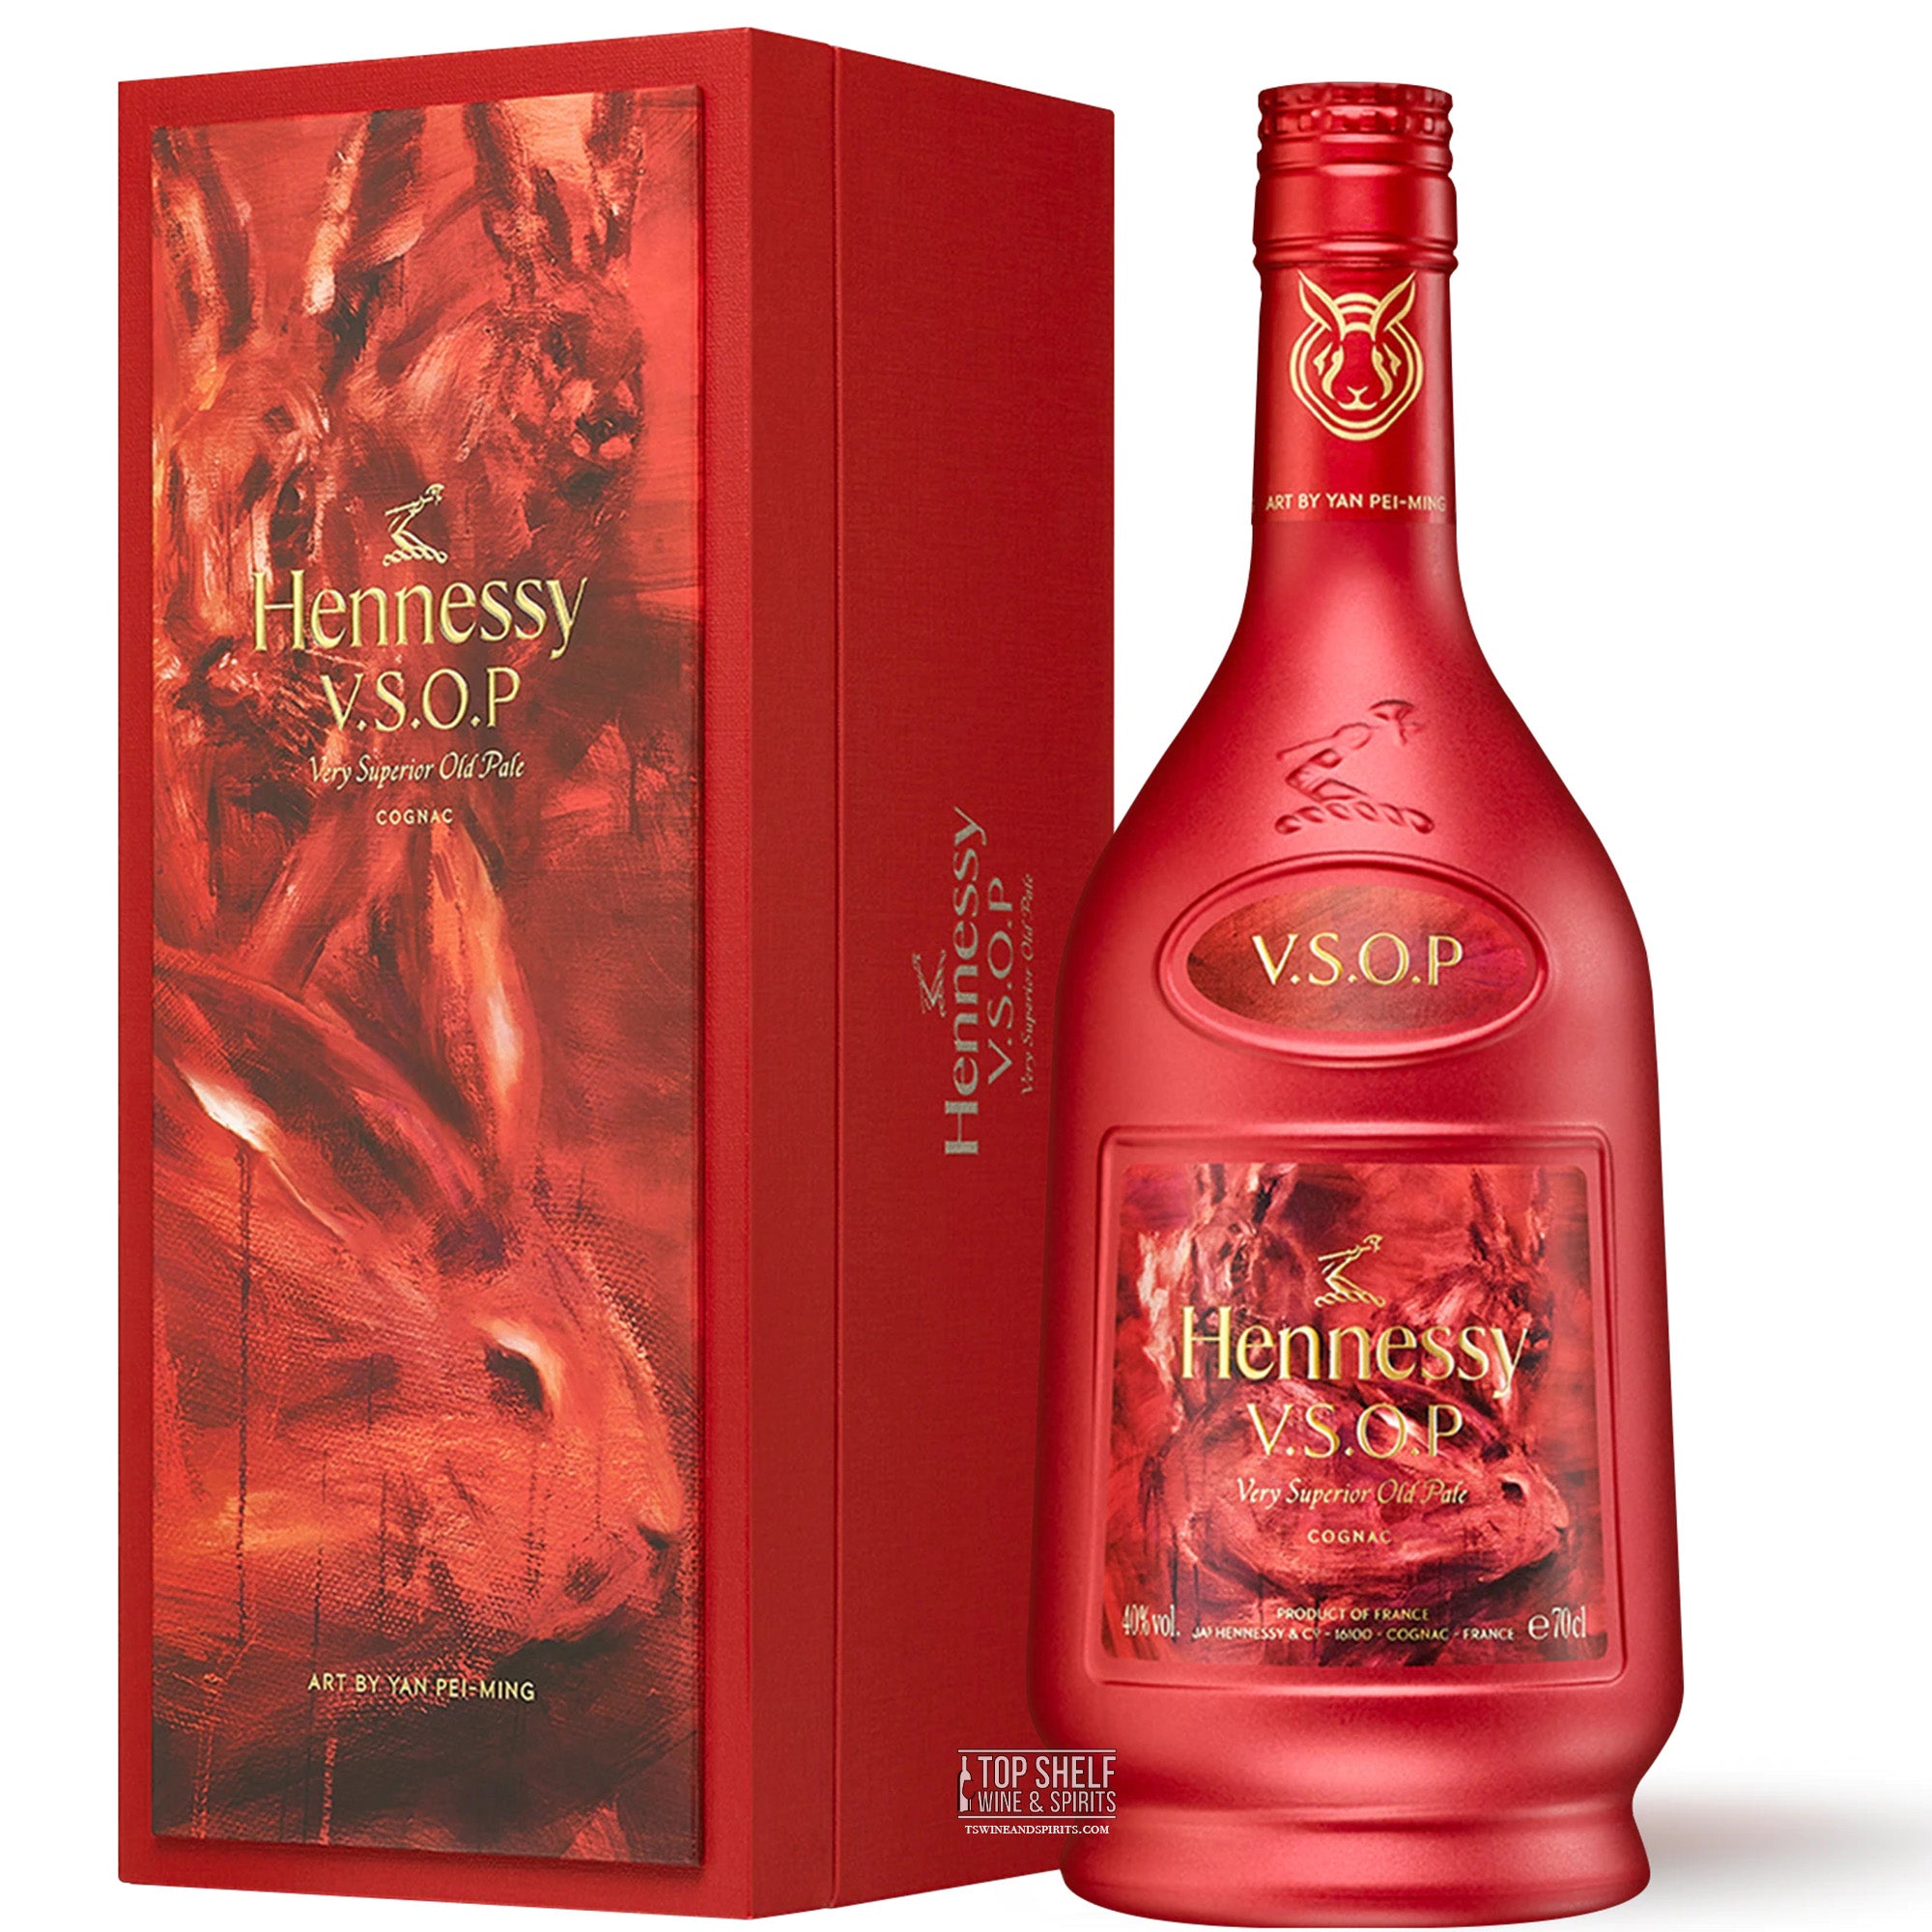 Hennessy V.S.O.P. Privilage with Limited Edition Gift Box